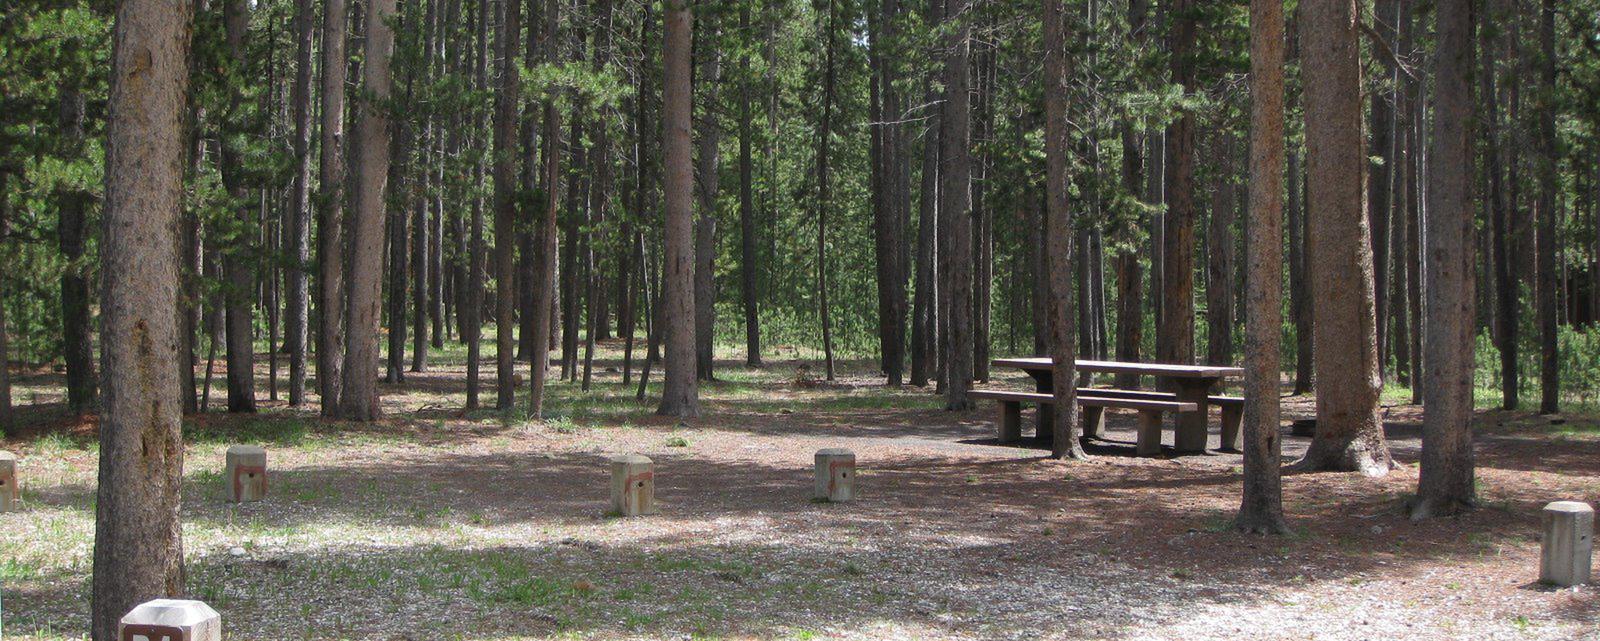 Site B4, surrounded by pine trees, picnic table & fire ringSite B4